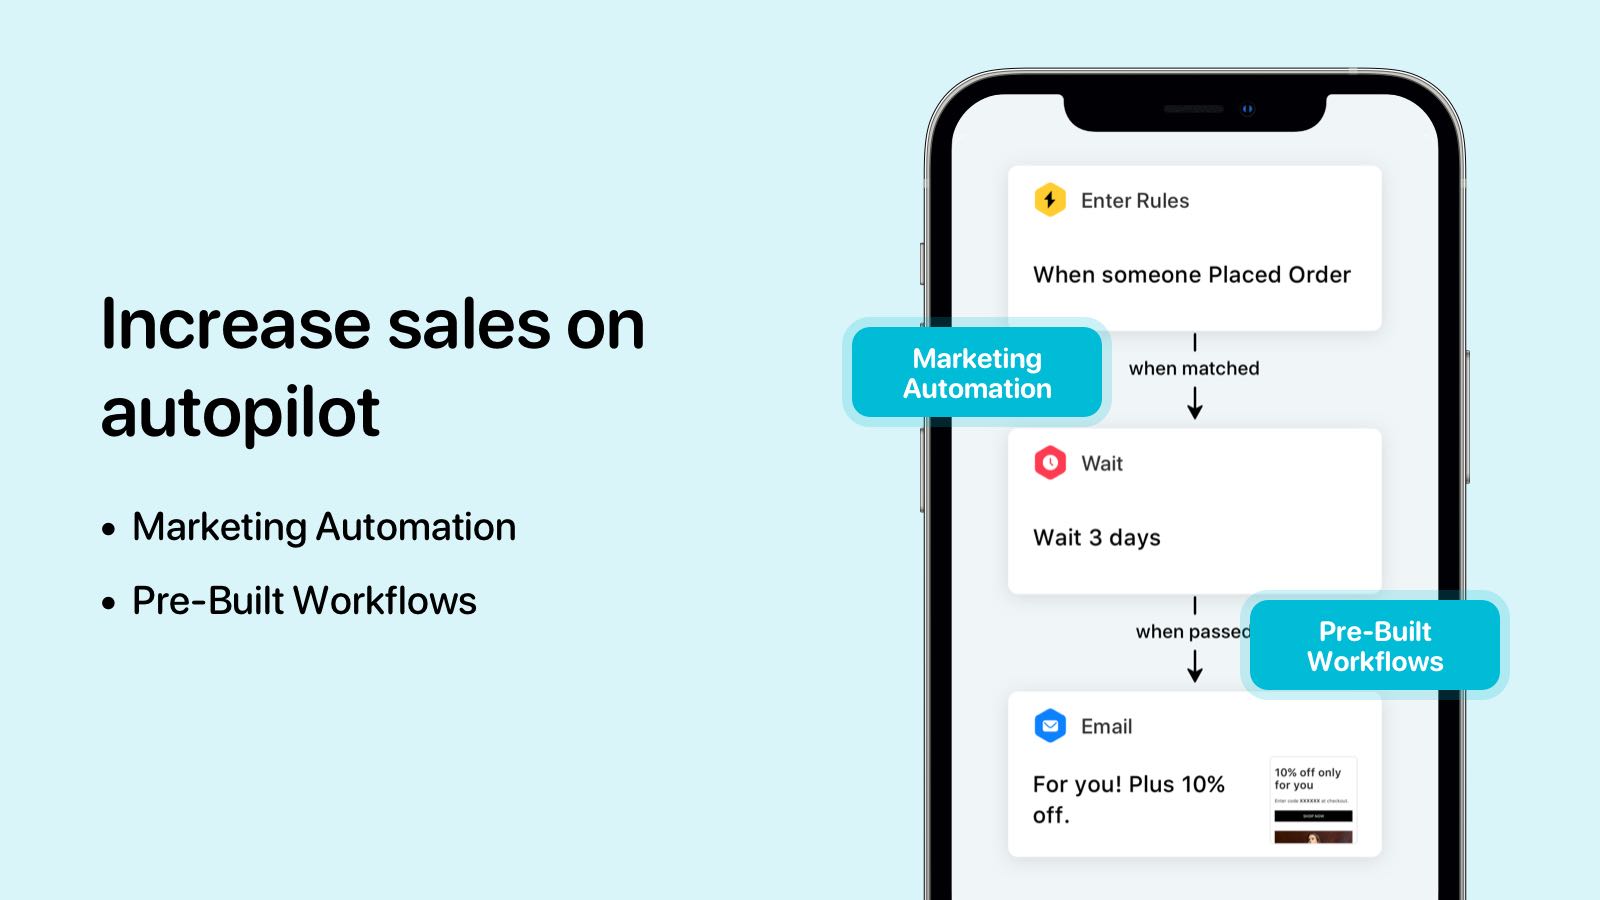 Increase sales with built-in workflows